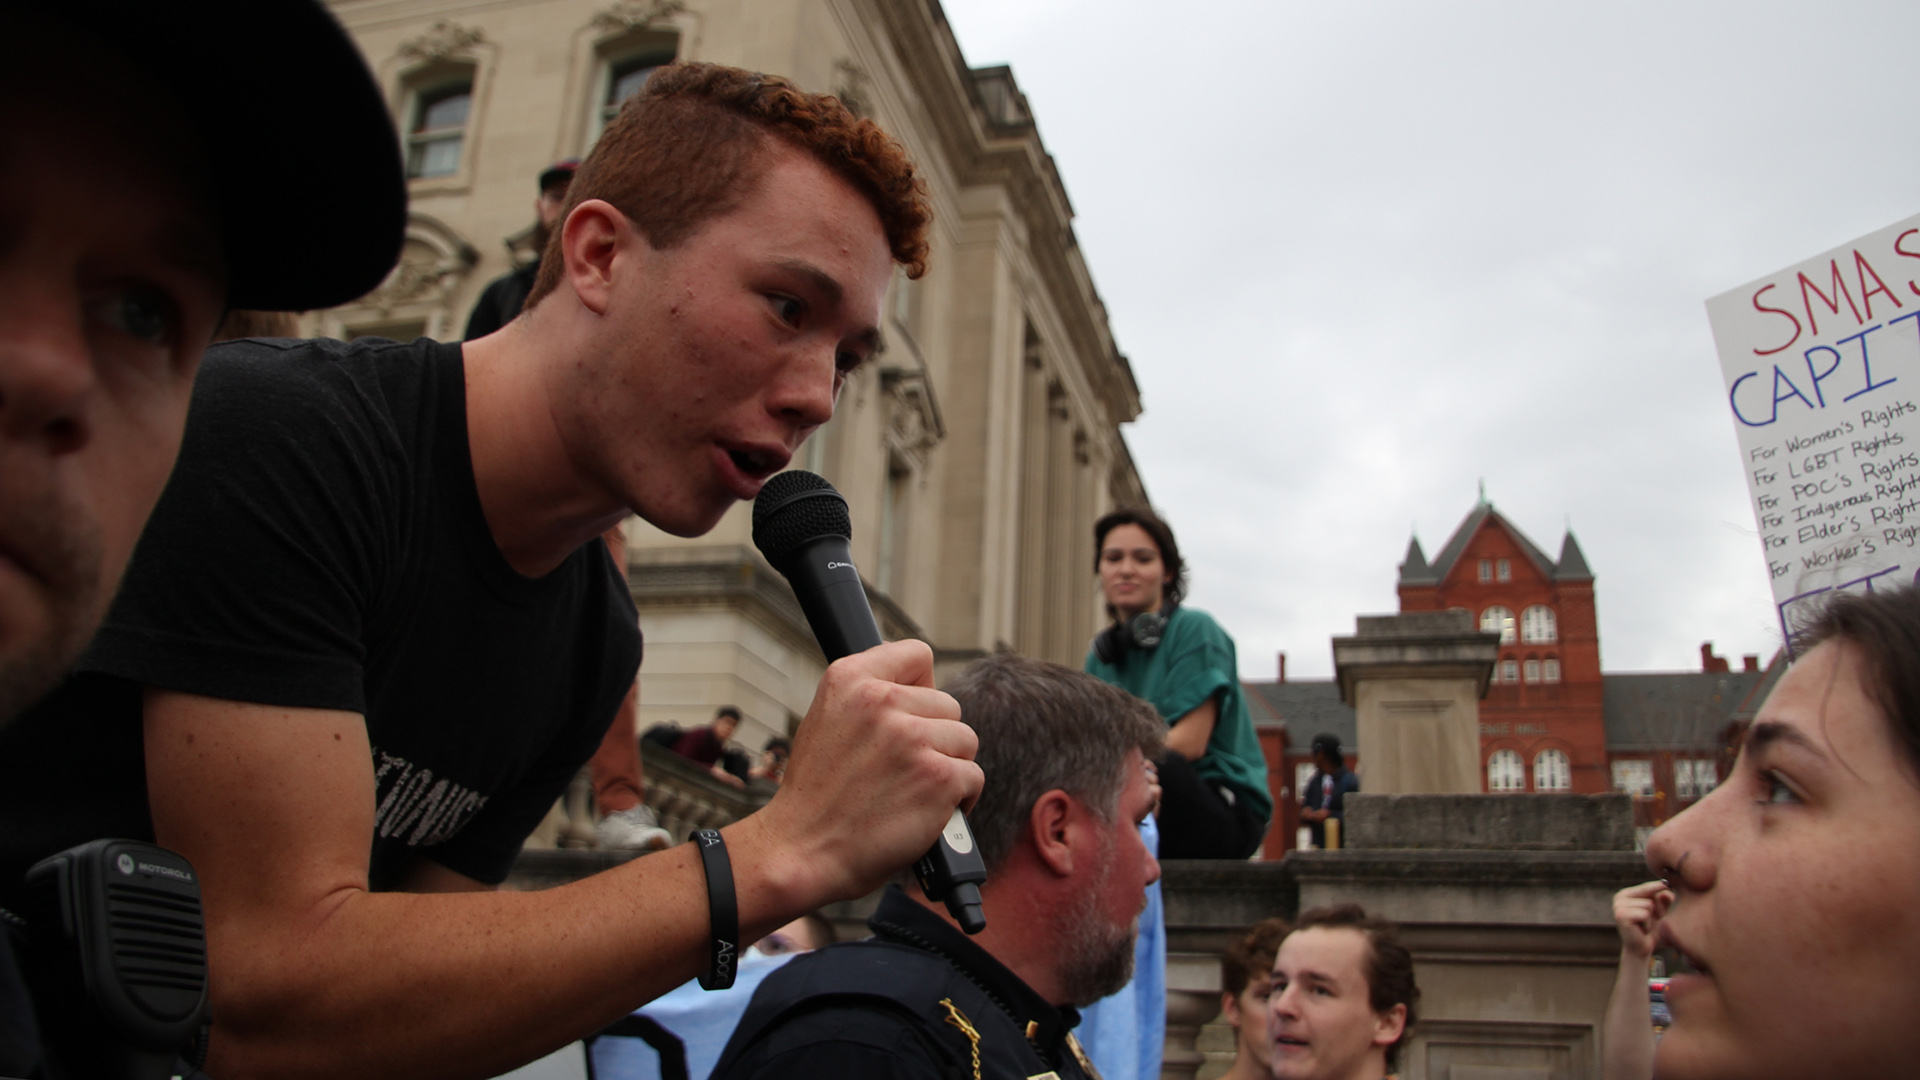 An evangelist speaking into a microphone outdoors faces and lean towards a protestor, with other people and buildings in the background.